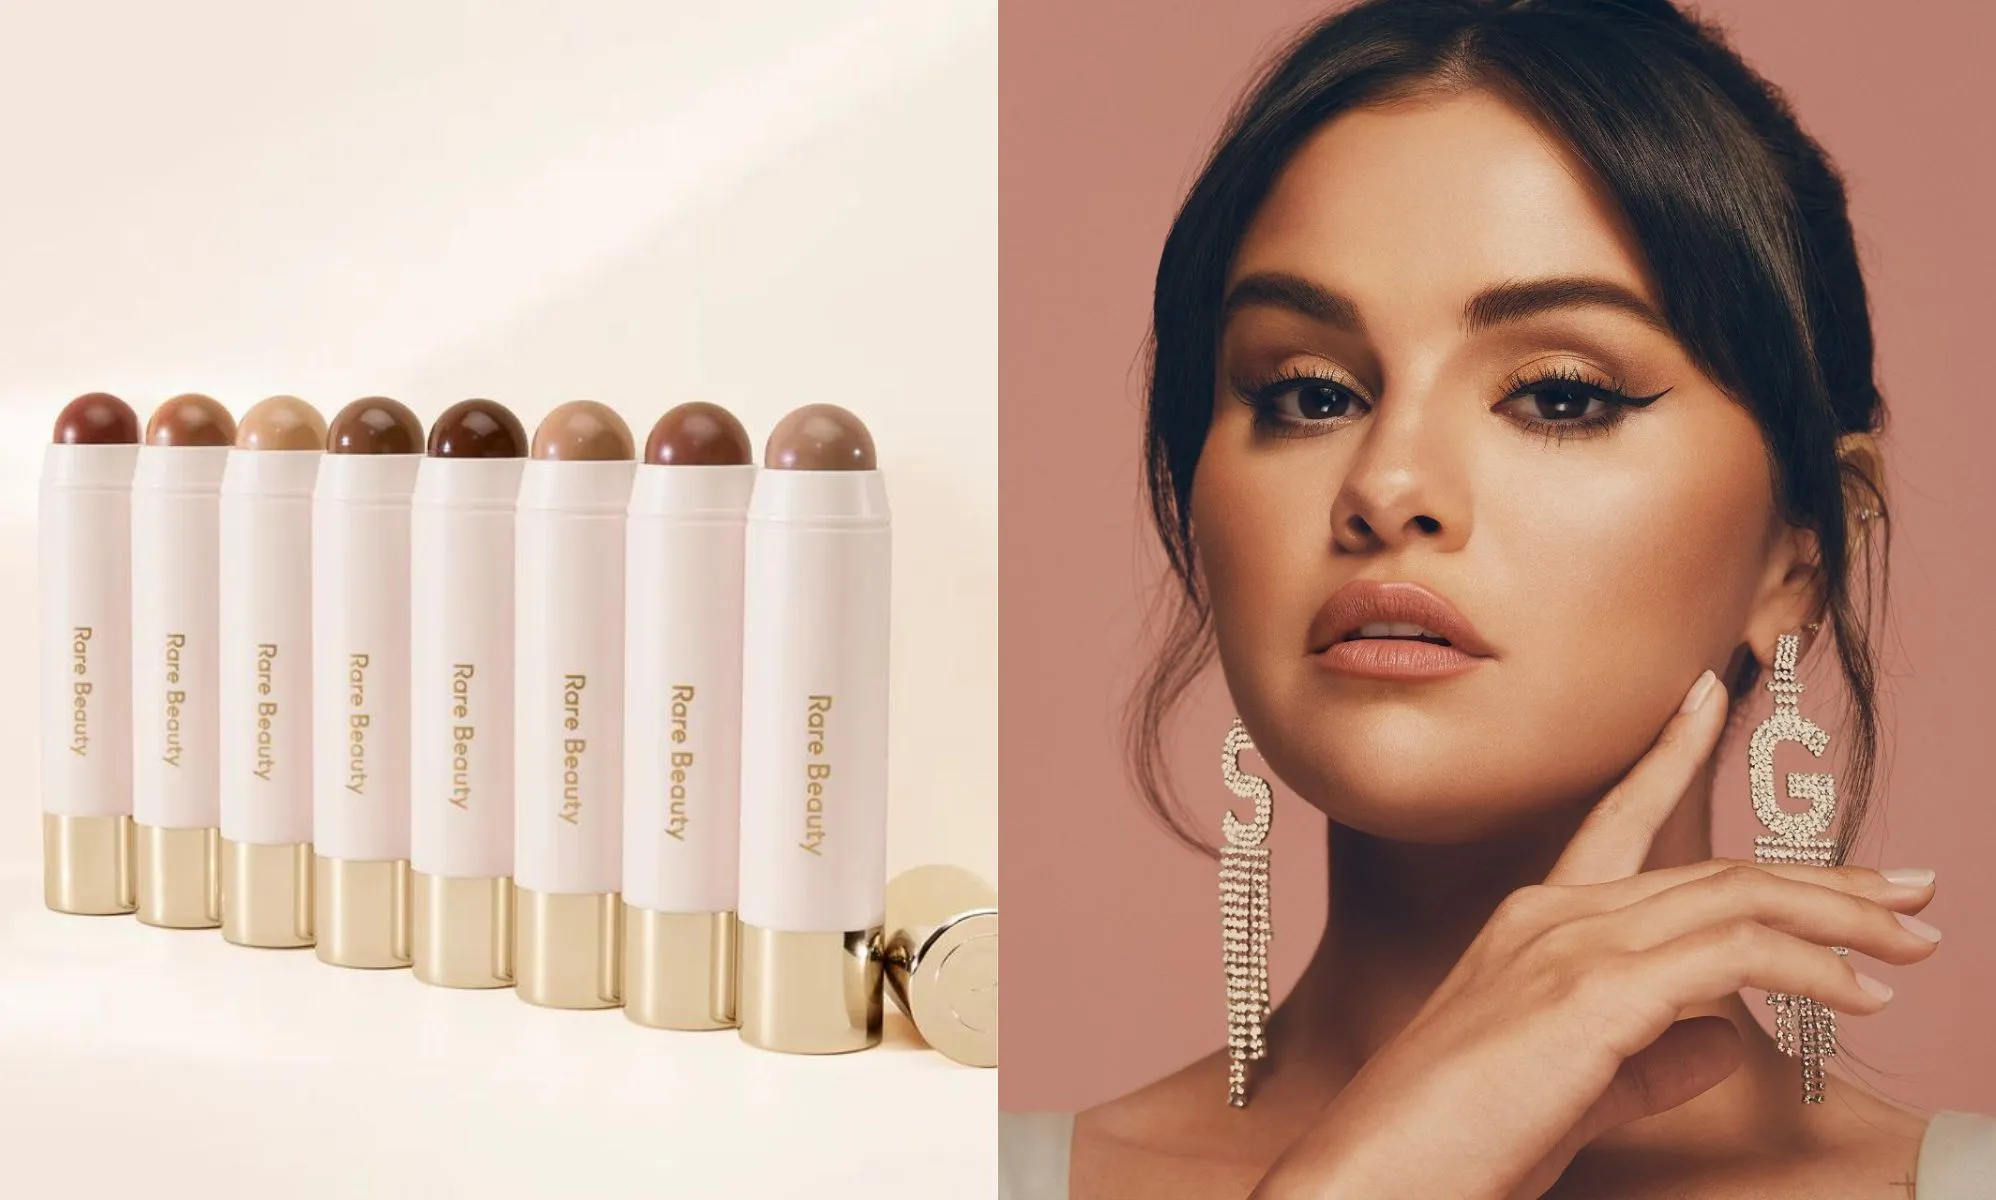 Selena Gomez's Rare Beauty extends shade range after 'listening' to fans